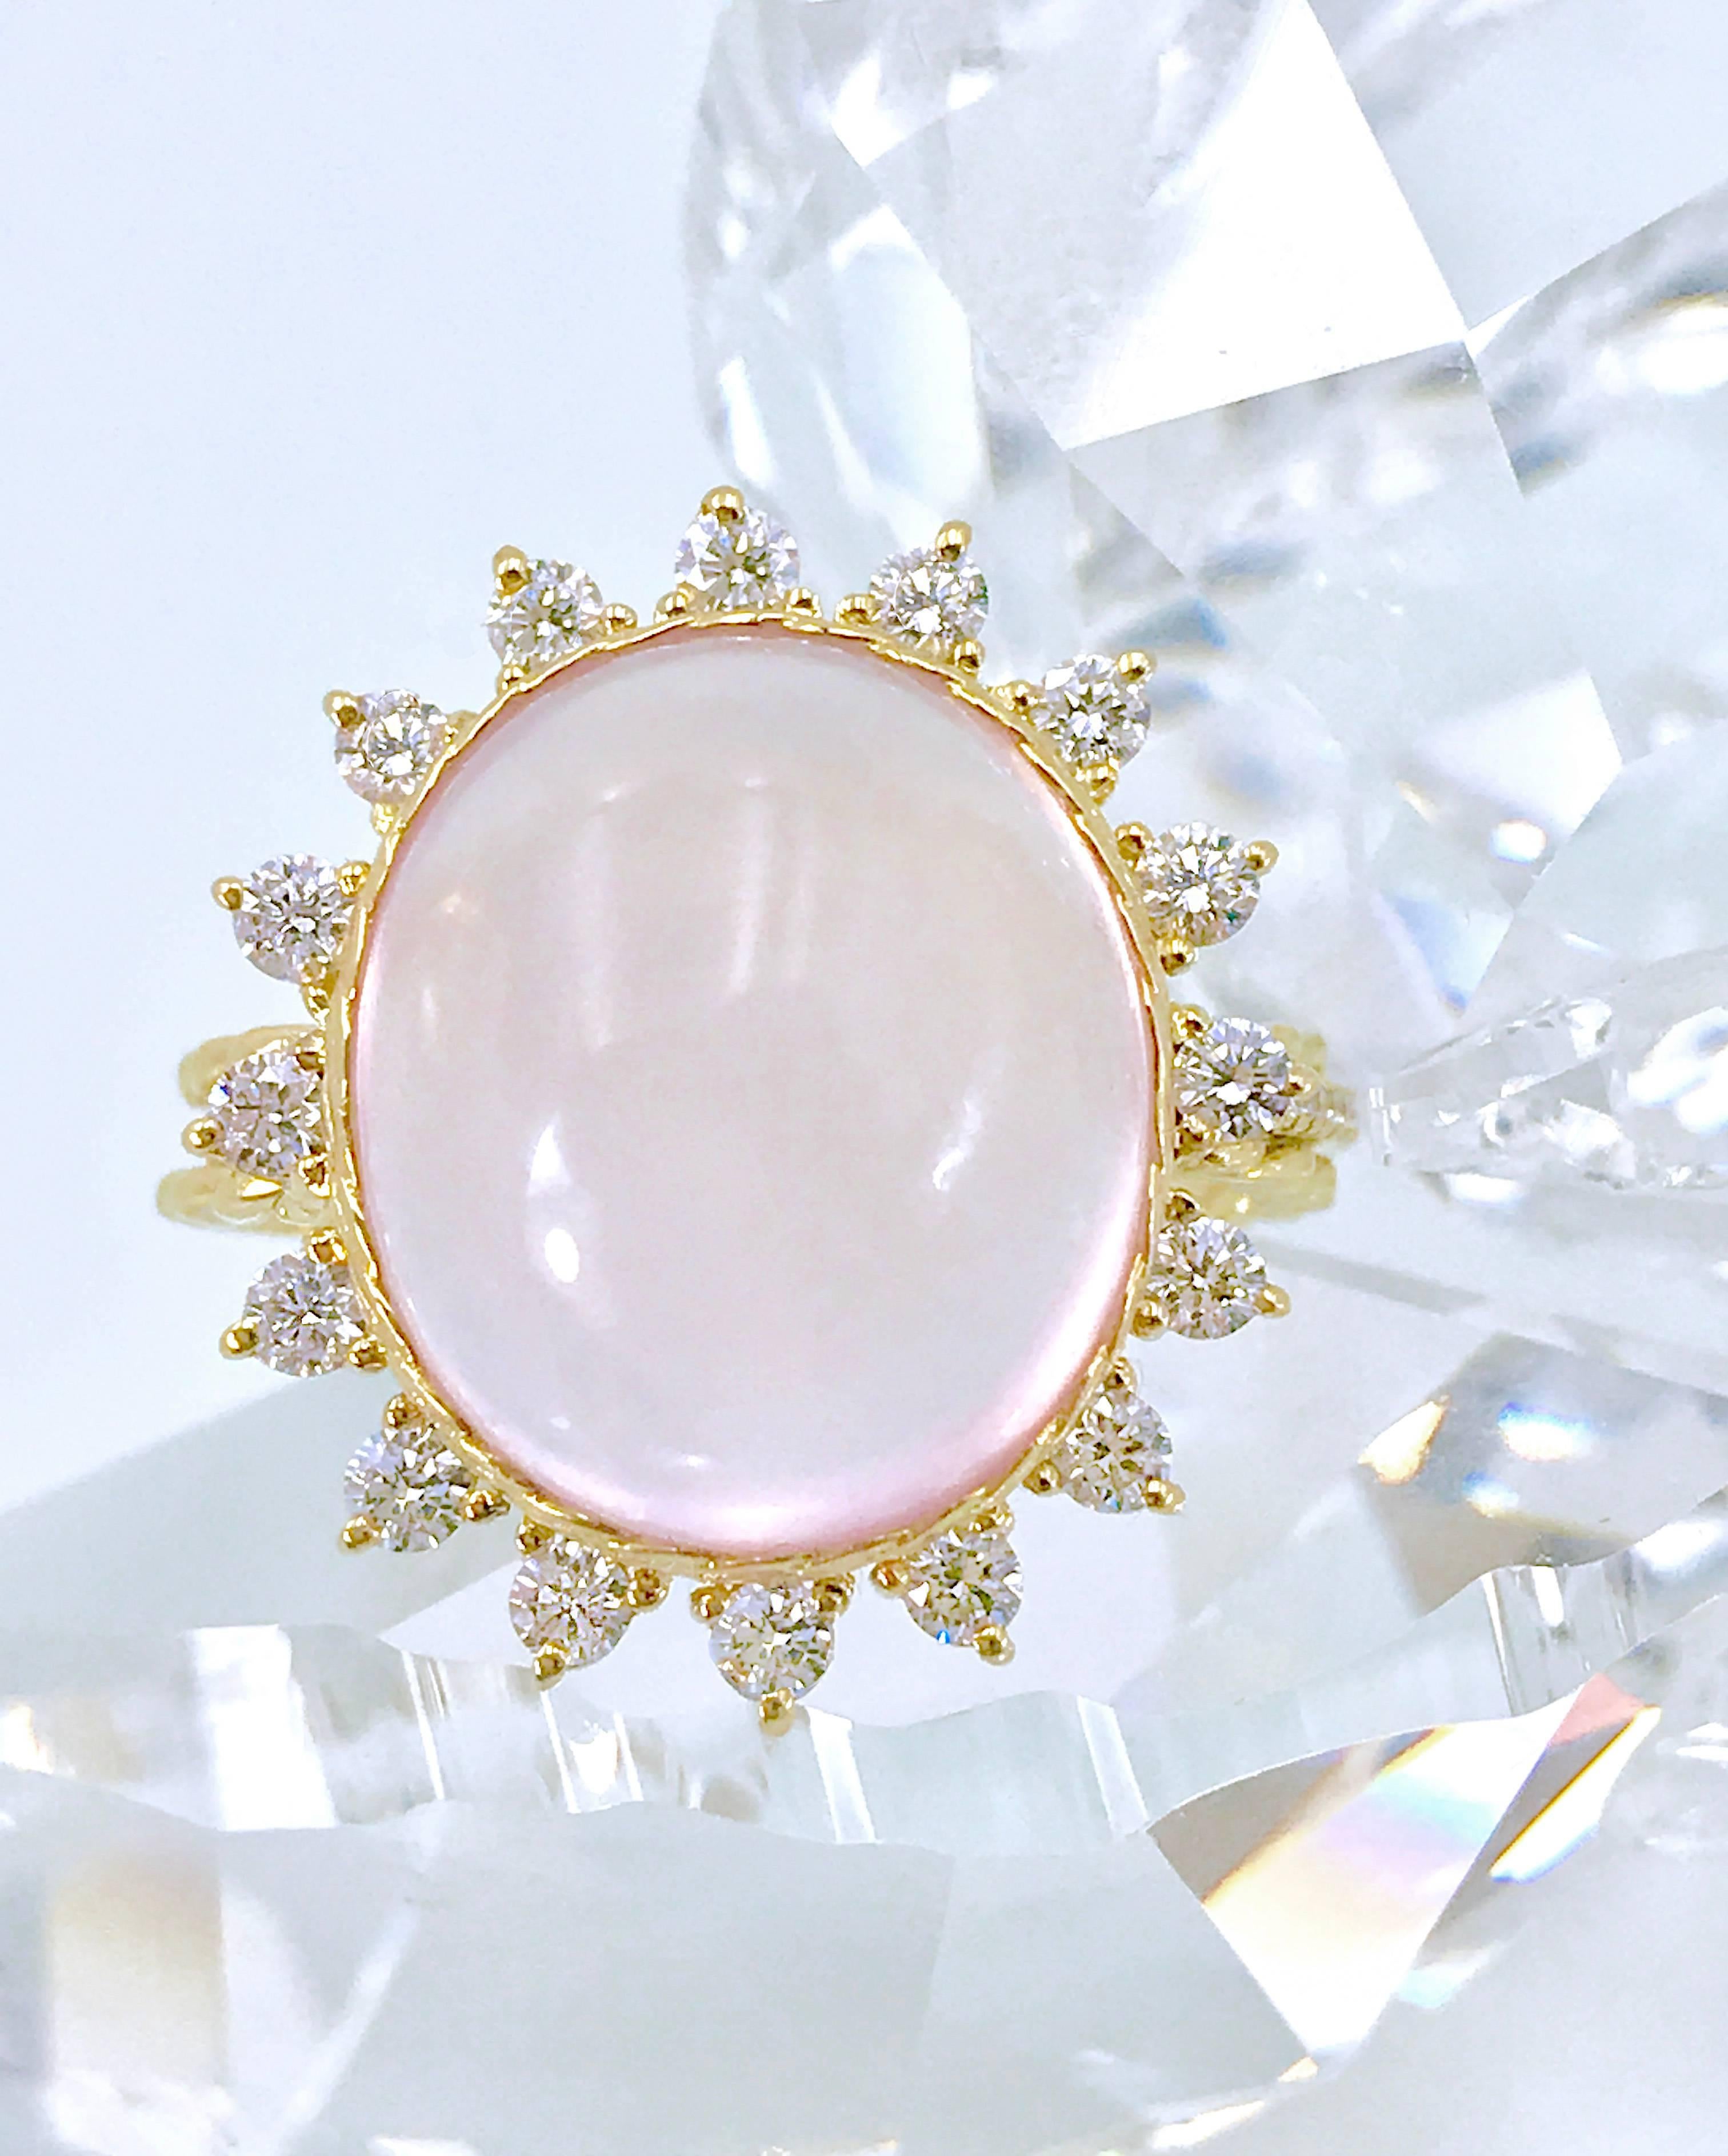 Charming 10.41 carat Rose Quartz Sun Burst Diamond Halo Cocktail Ring Set in 18K Yellow Gold in size 6 with 0.624 CTW Diamonds. It's in stock and ready to ship.

Rose quartz is a calming and reassuring crystal, and the color of soft pink has the